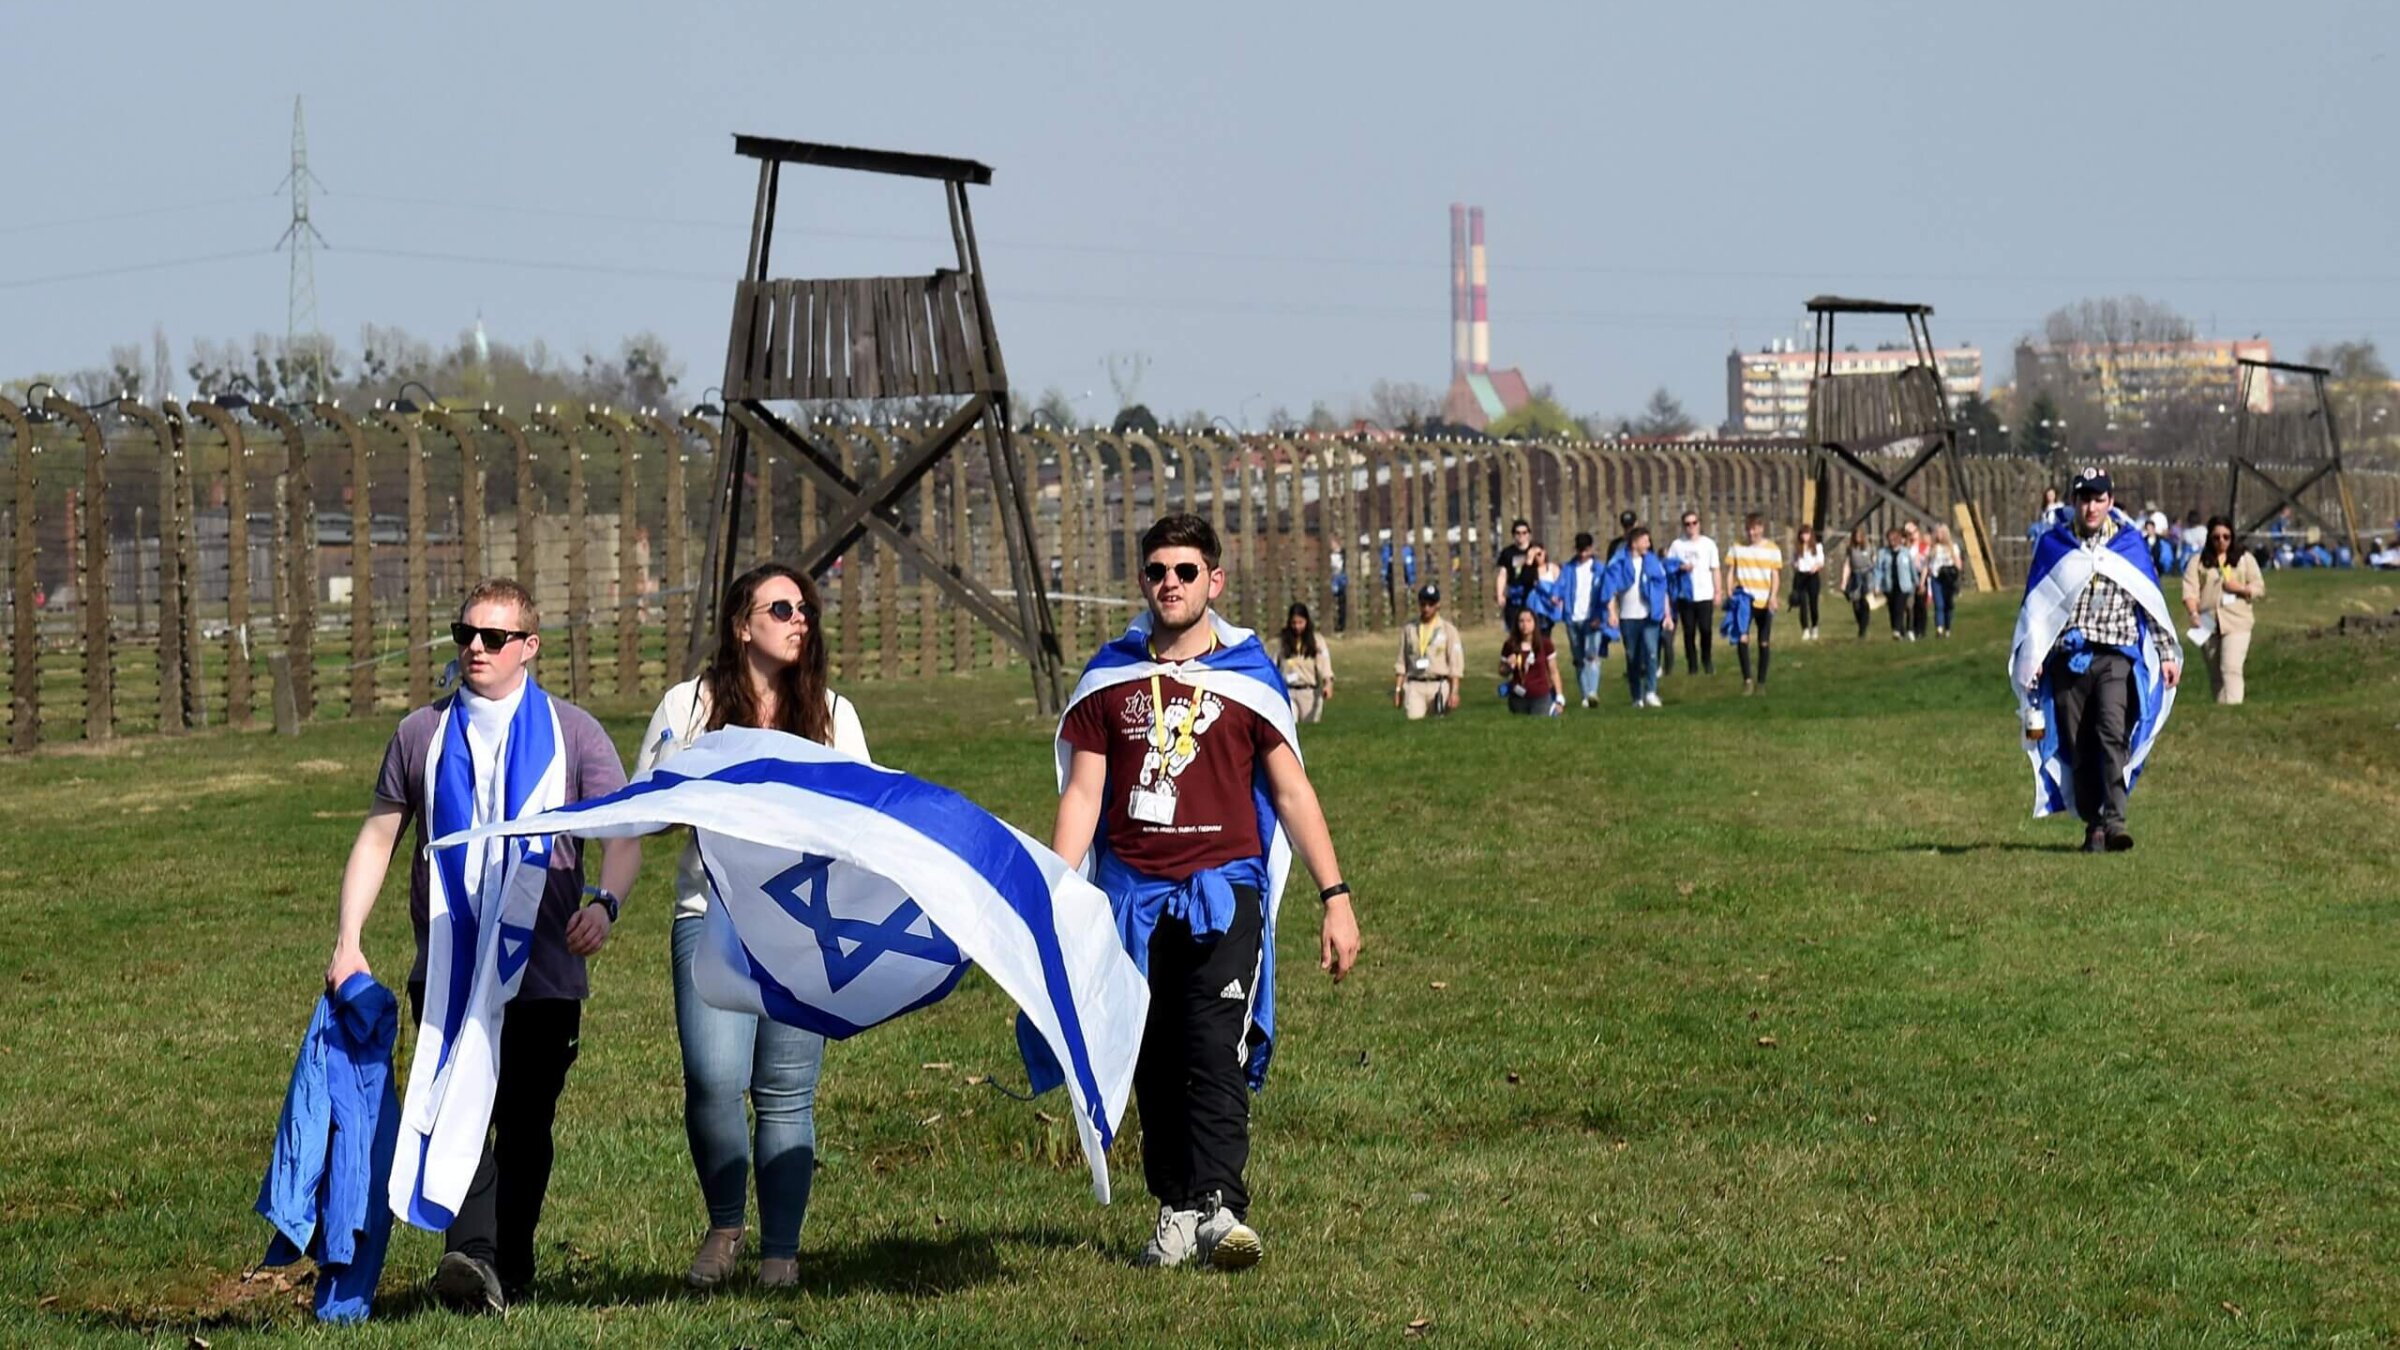 Youth hold Israeli flags during the "March of the Living", a yearly Holocaust remembrance march between the former death camps of Auschwitz and Birkenau, on April 12, 2018 in Oswiecim (Auschwitz), Poland. 
